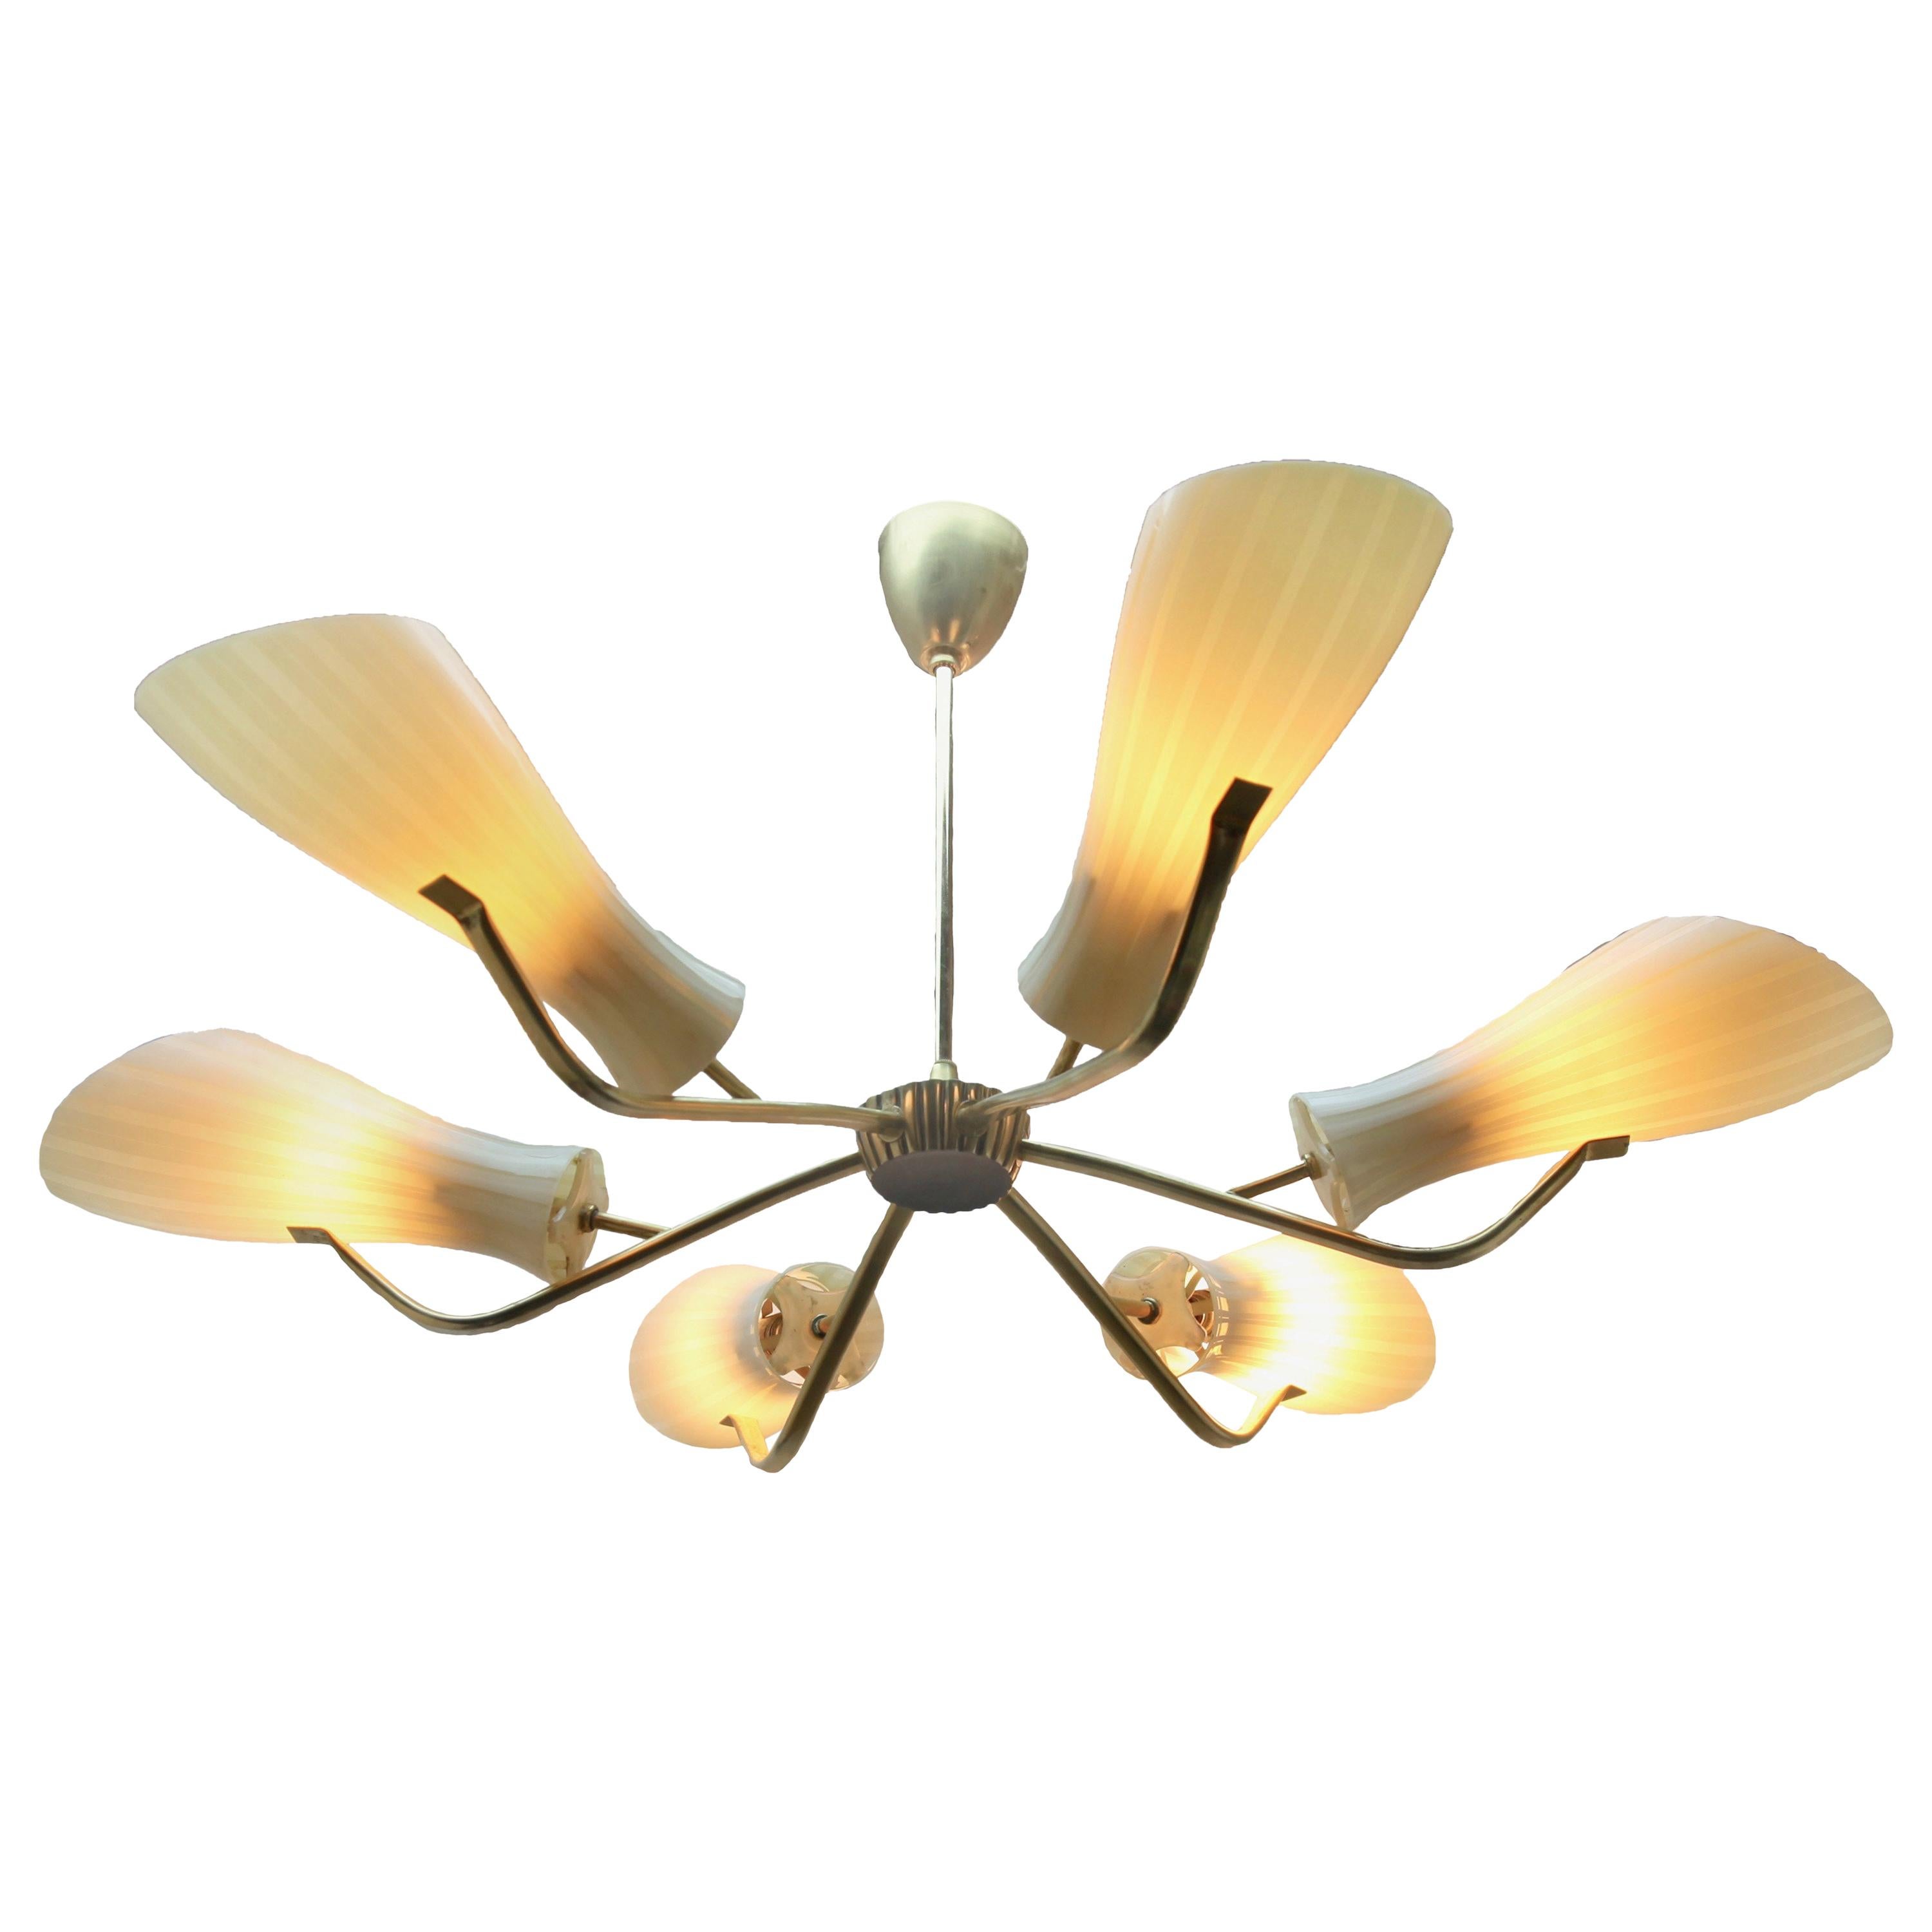 Vintage Chandelier in the Style of Stilnovo Six Arms, Italian, 1960s